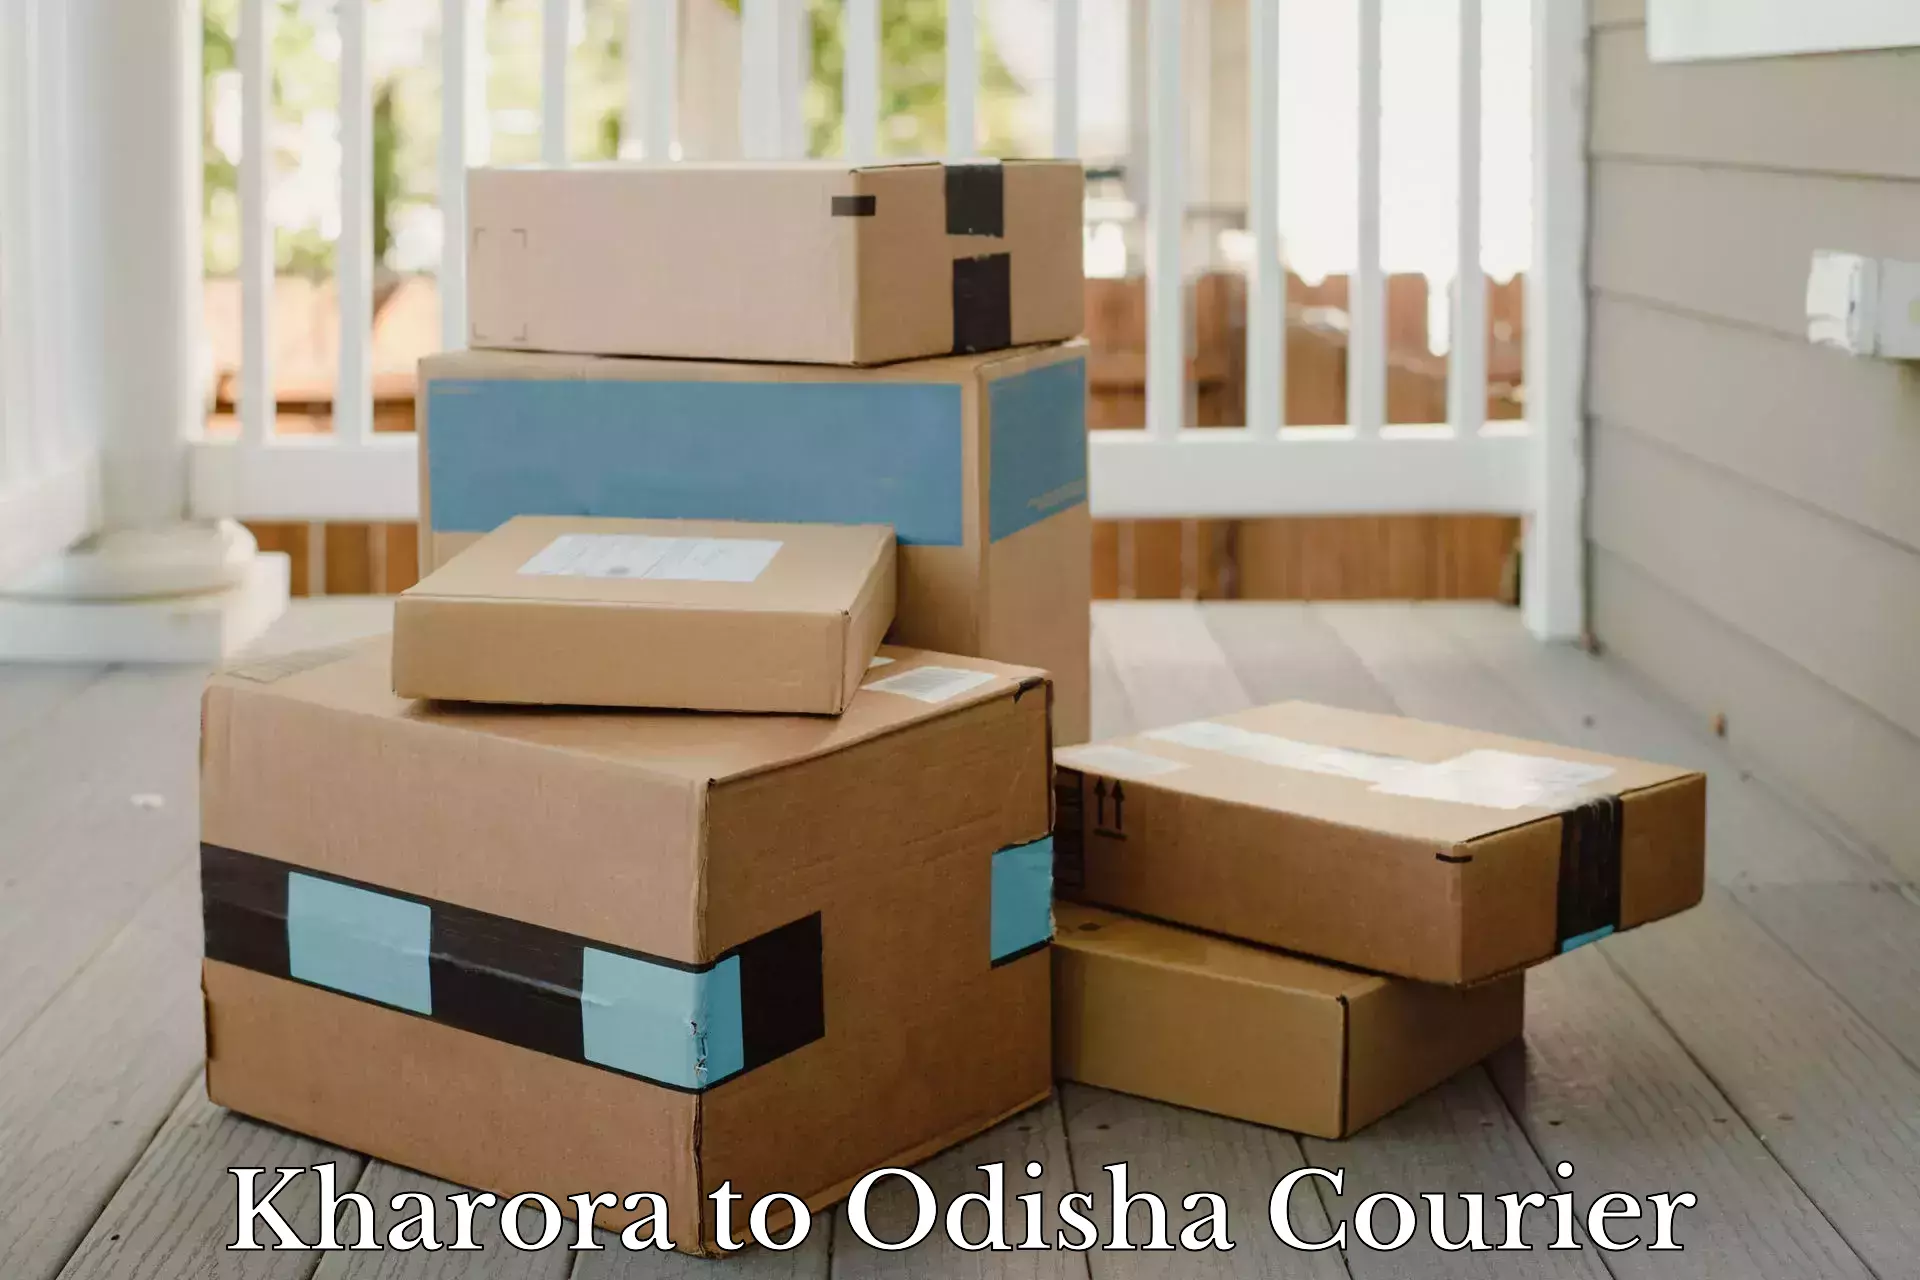 End-to-end delivery in Kharora to Baripada